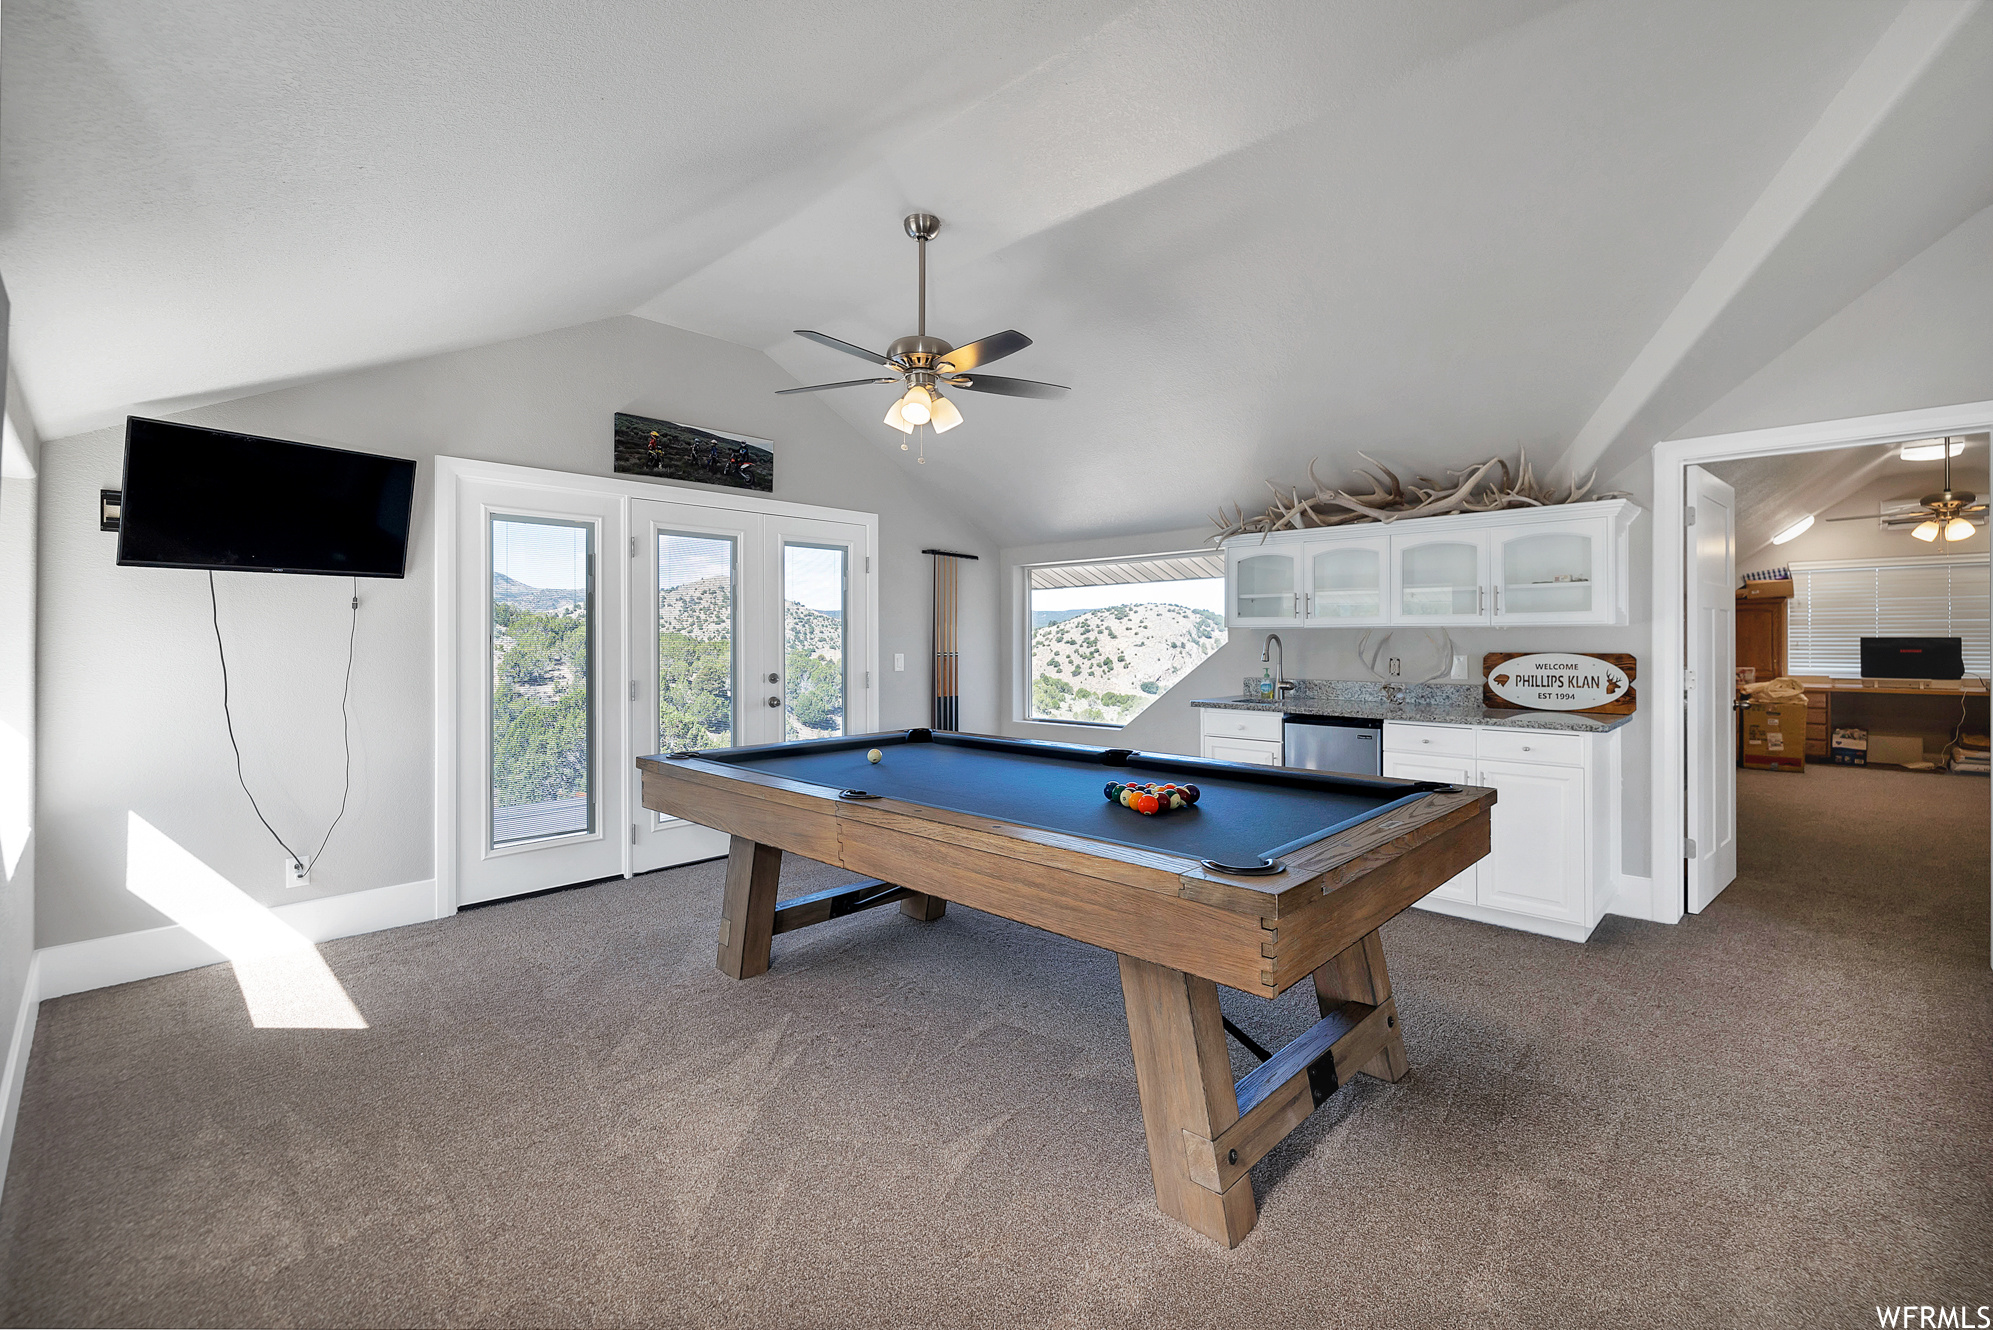 Game room featuring a ceiling fan, natural light, lofted ceiling, carpet, and TV